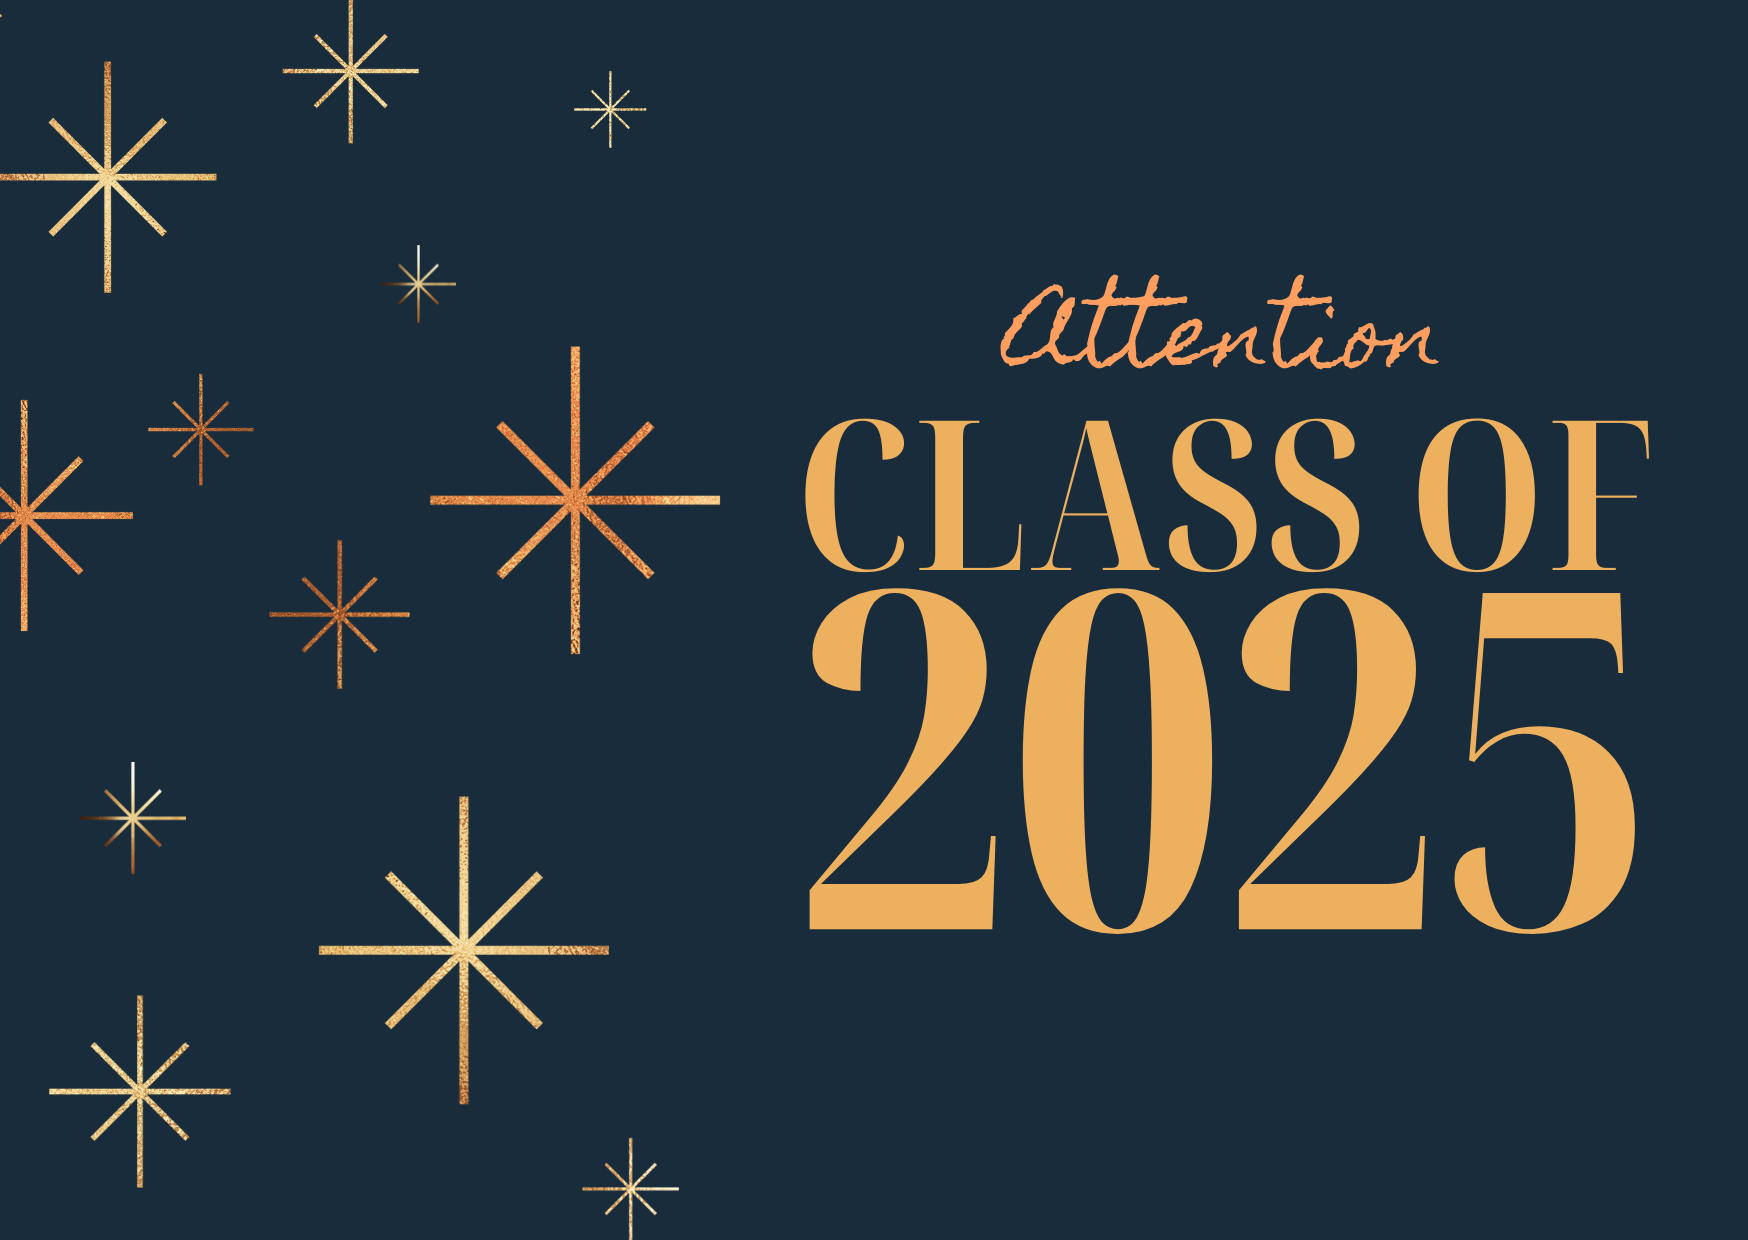 Attention class of 2025